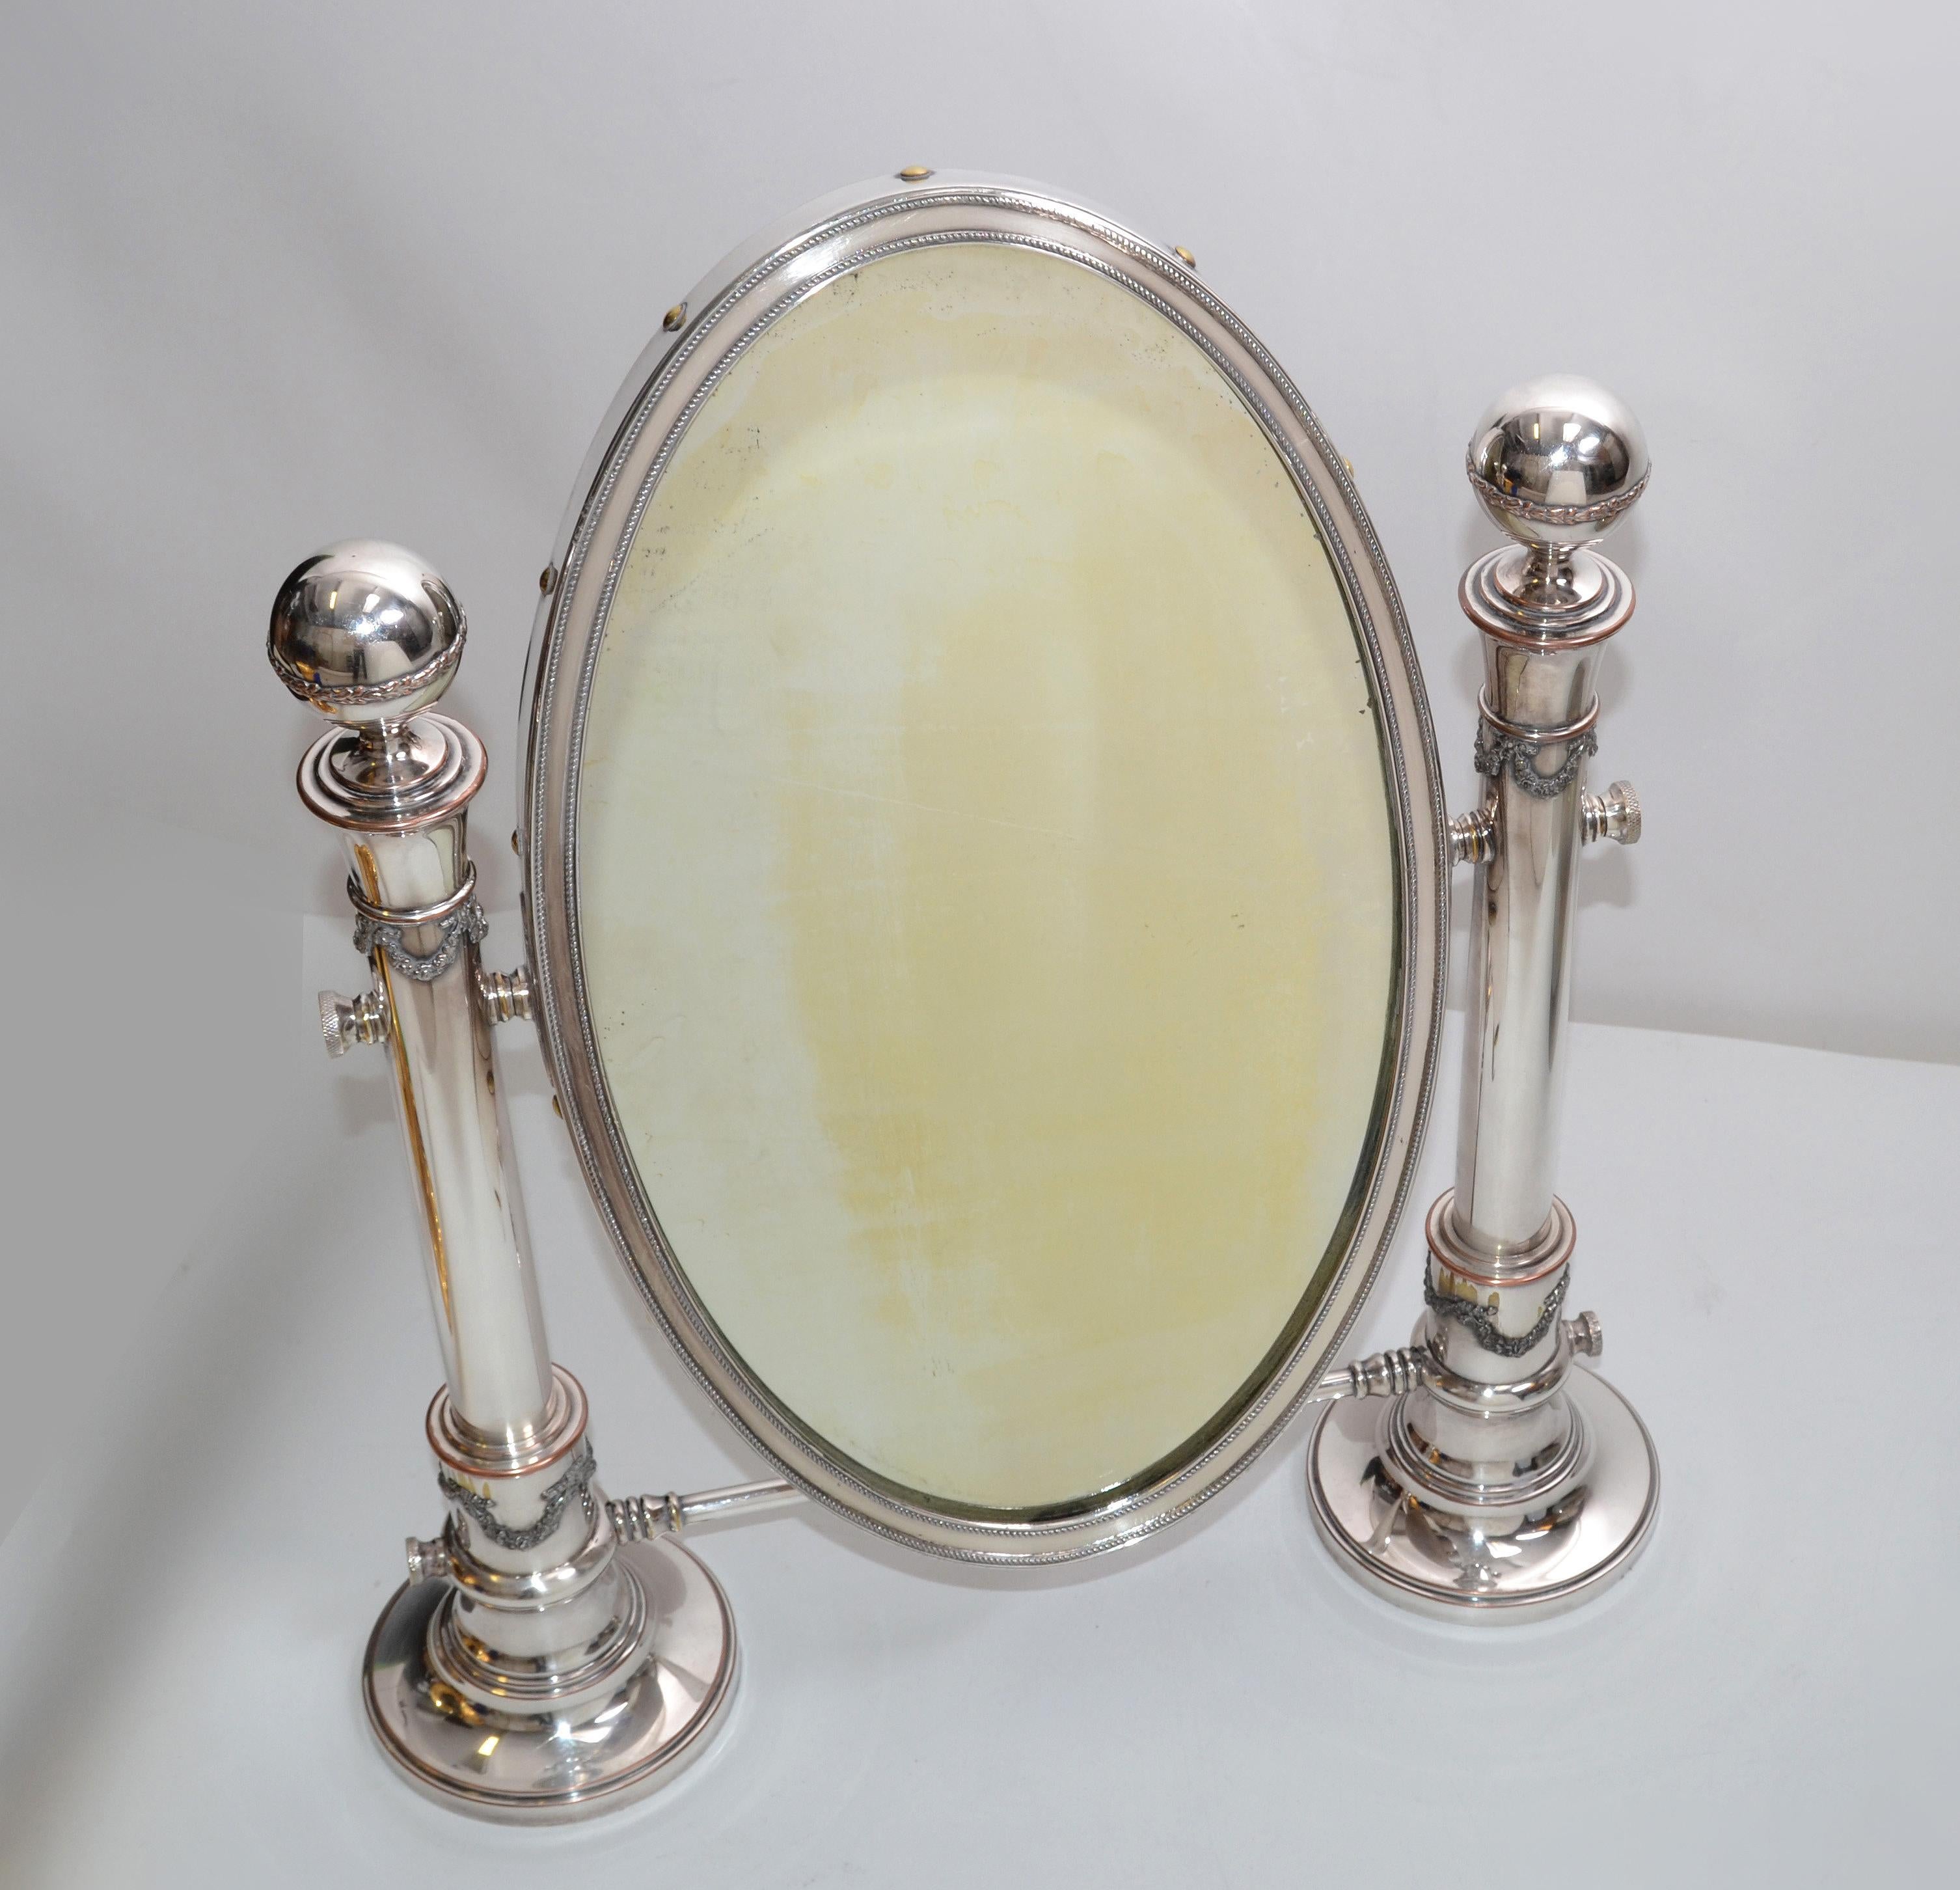 Silver plate oval vanity mirror or table mirror with ornate pedestals circa 1910 Sheffield, England.
The back is made of solid wood.
Makers trademark at the side of the Mirror.
Mirror size: 9 x 15 inches.